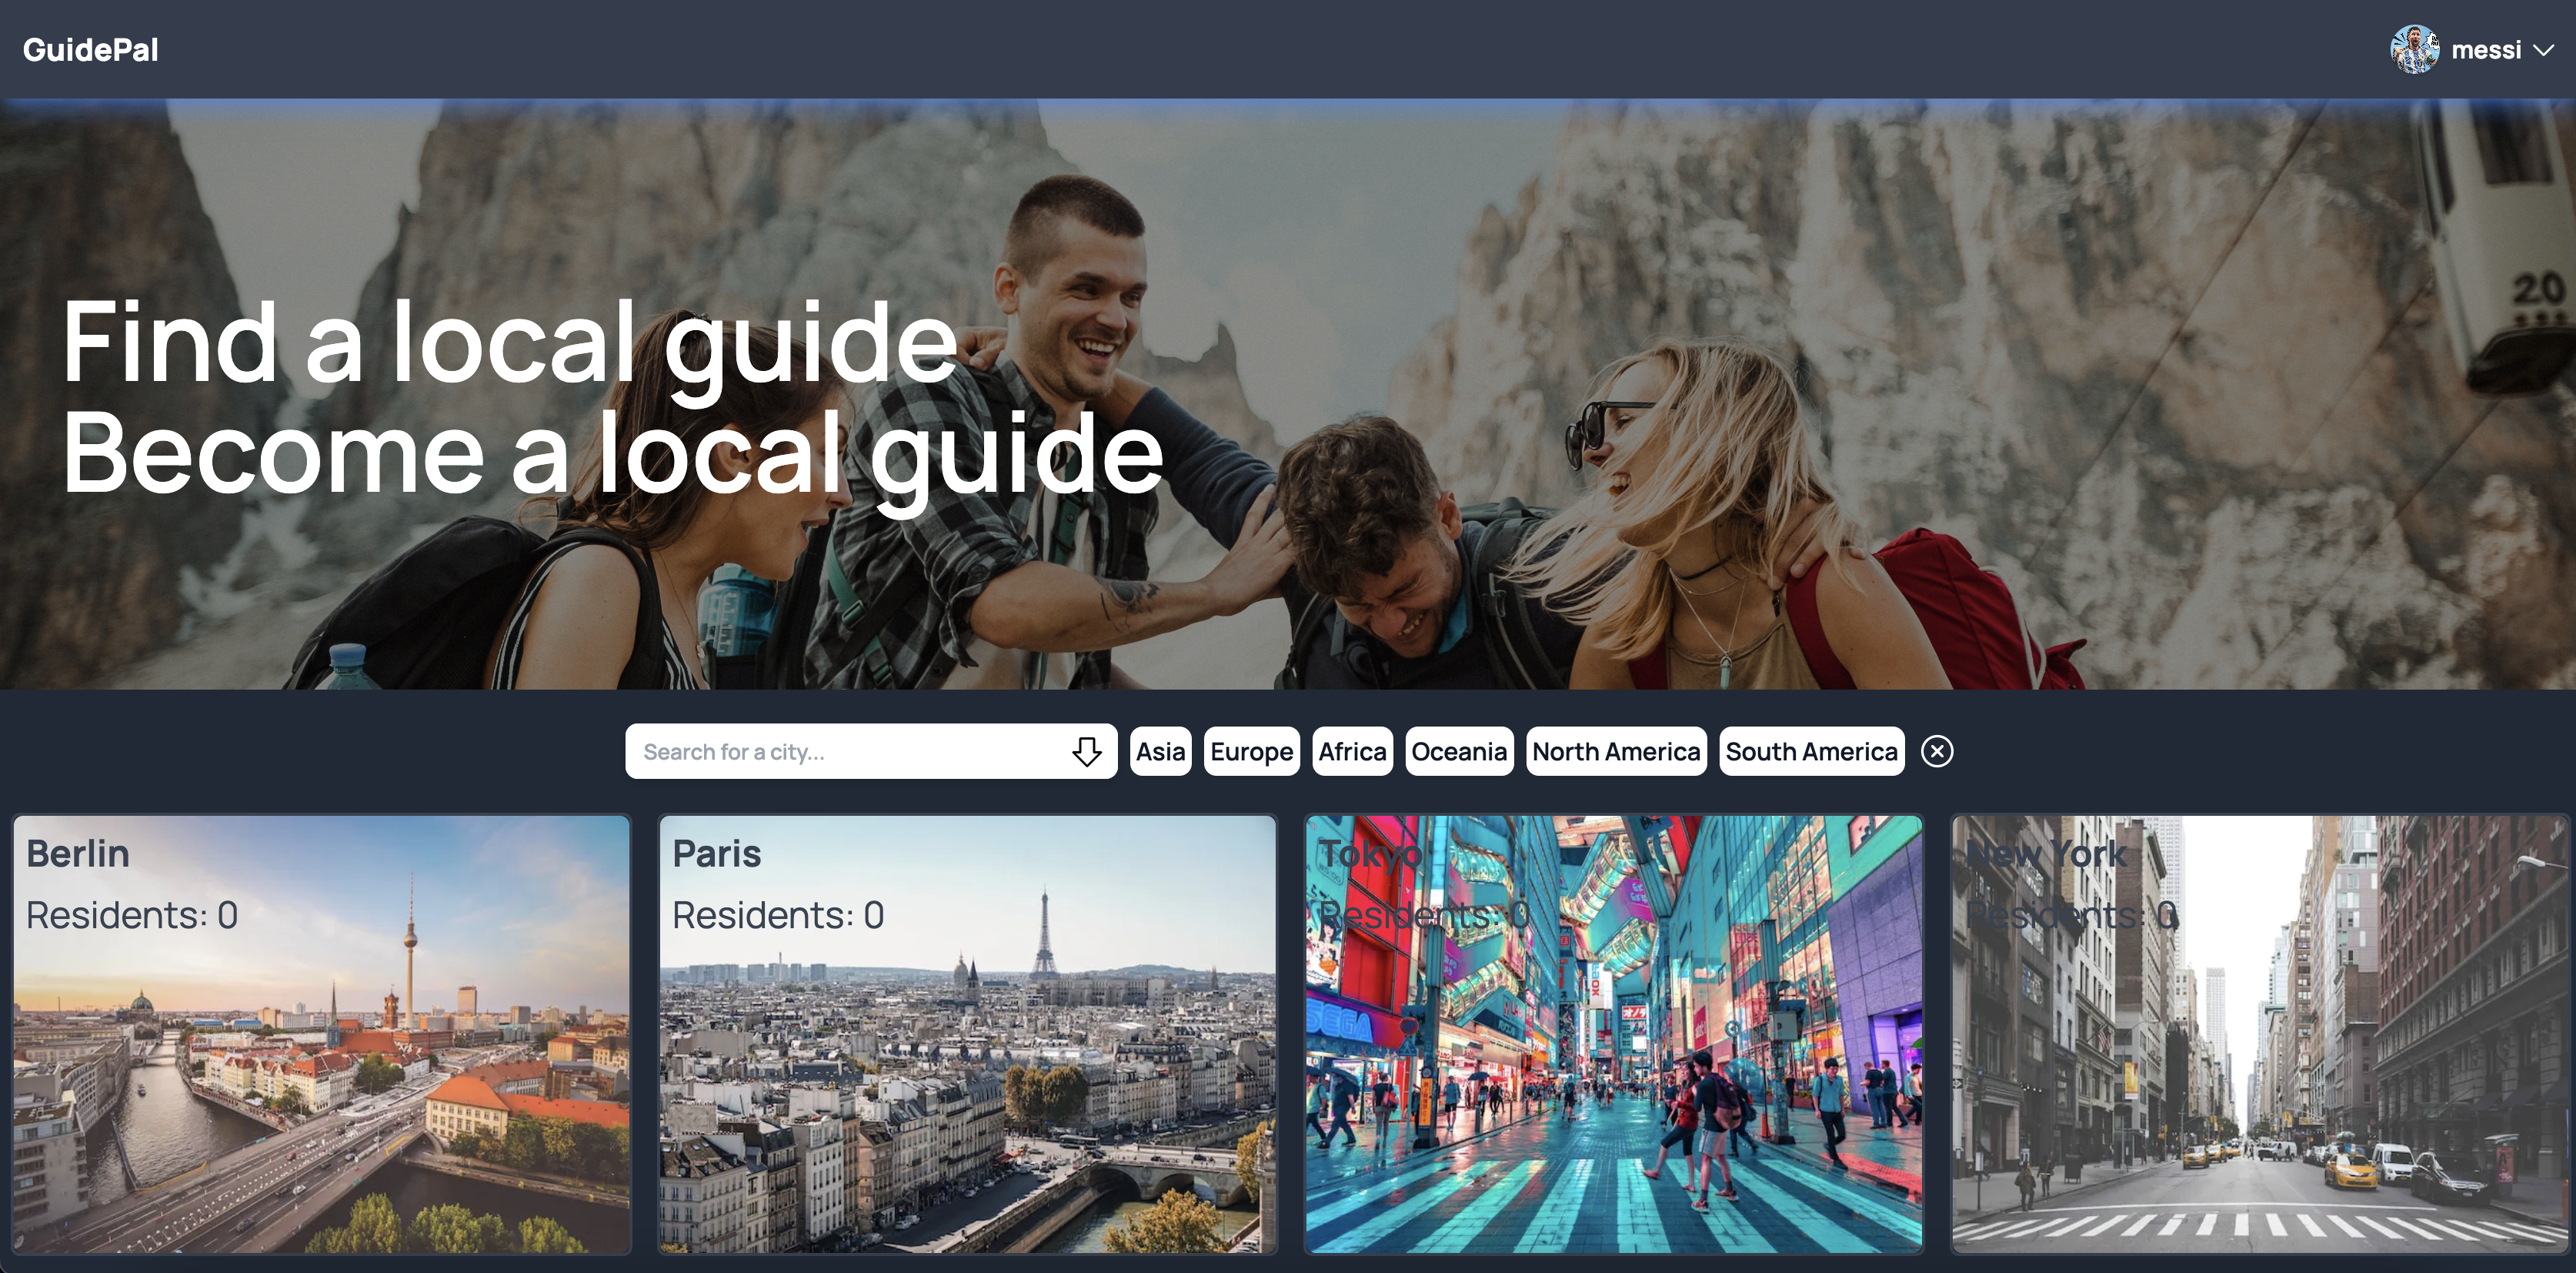 Home page of GuidePal